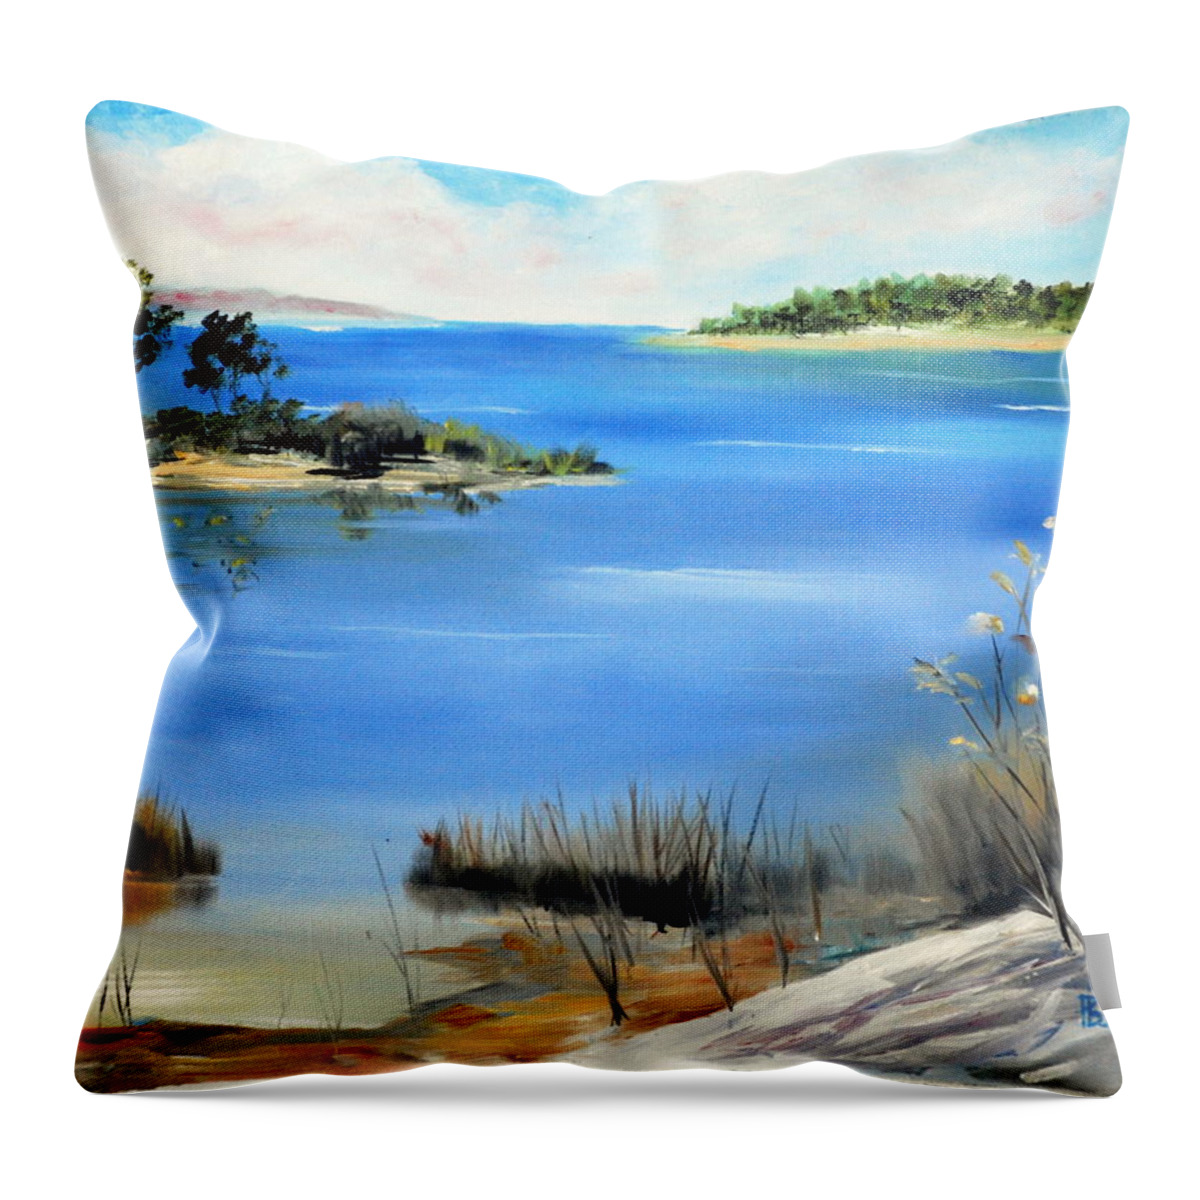 Water Throw Pillow featuring the painting Afternoon Water by Phil Burton